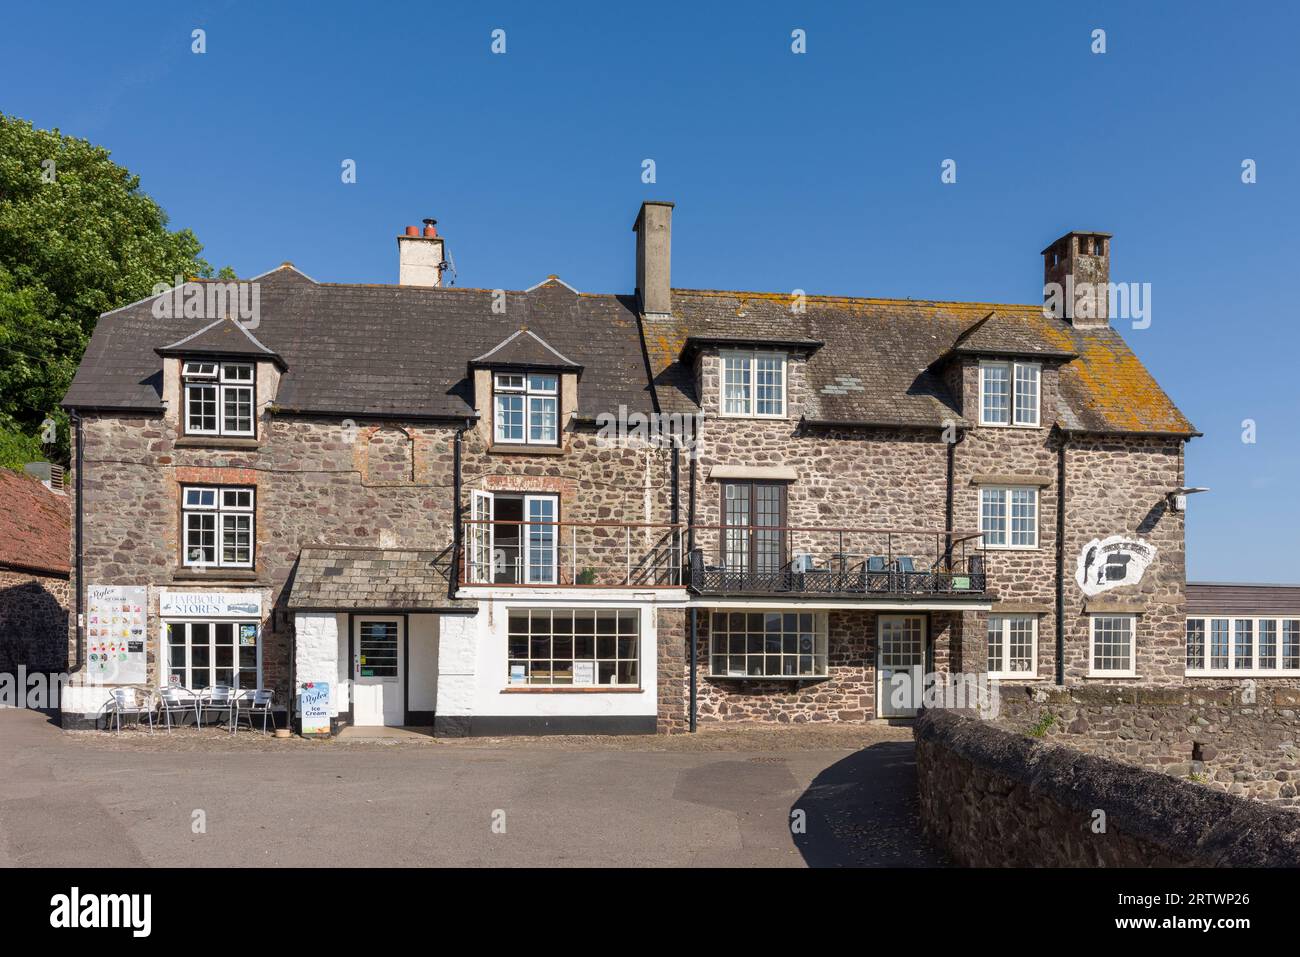 Cottages at Porlock Weir on the Exmoor National Park coast in Porlock Bay, Somerset, England. Stock Photo